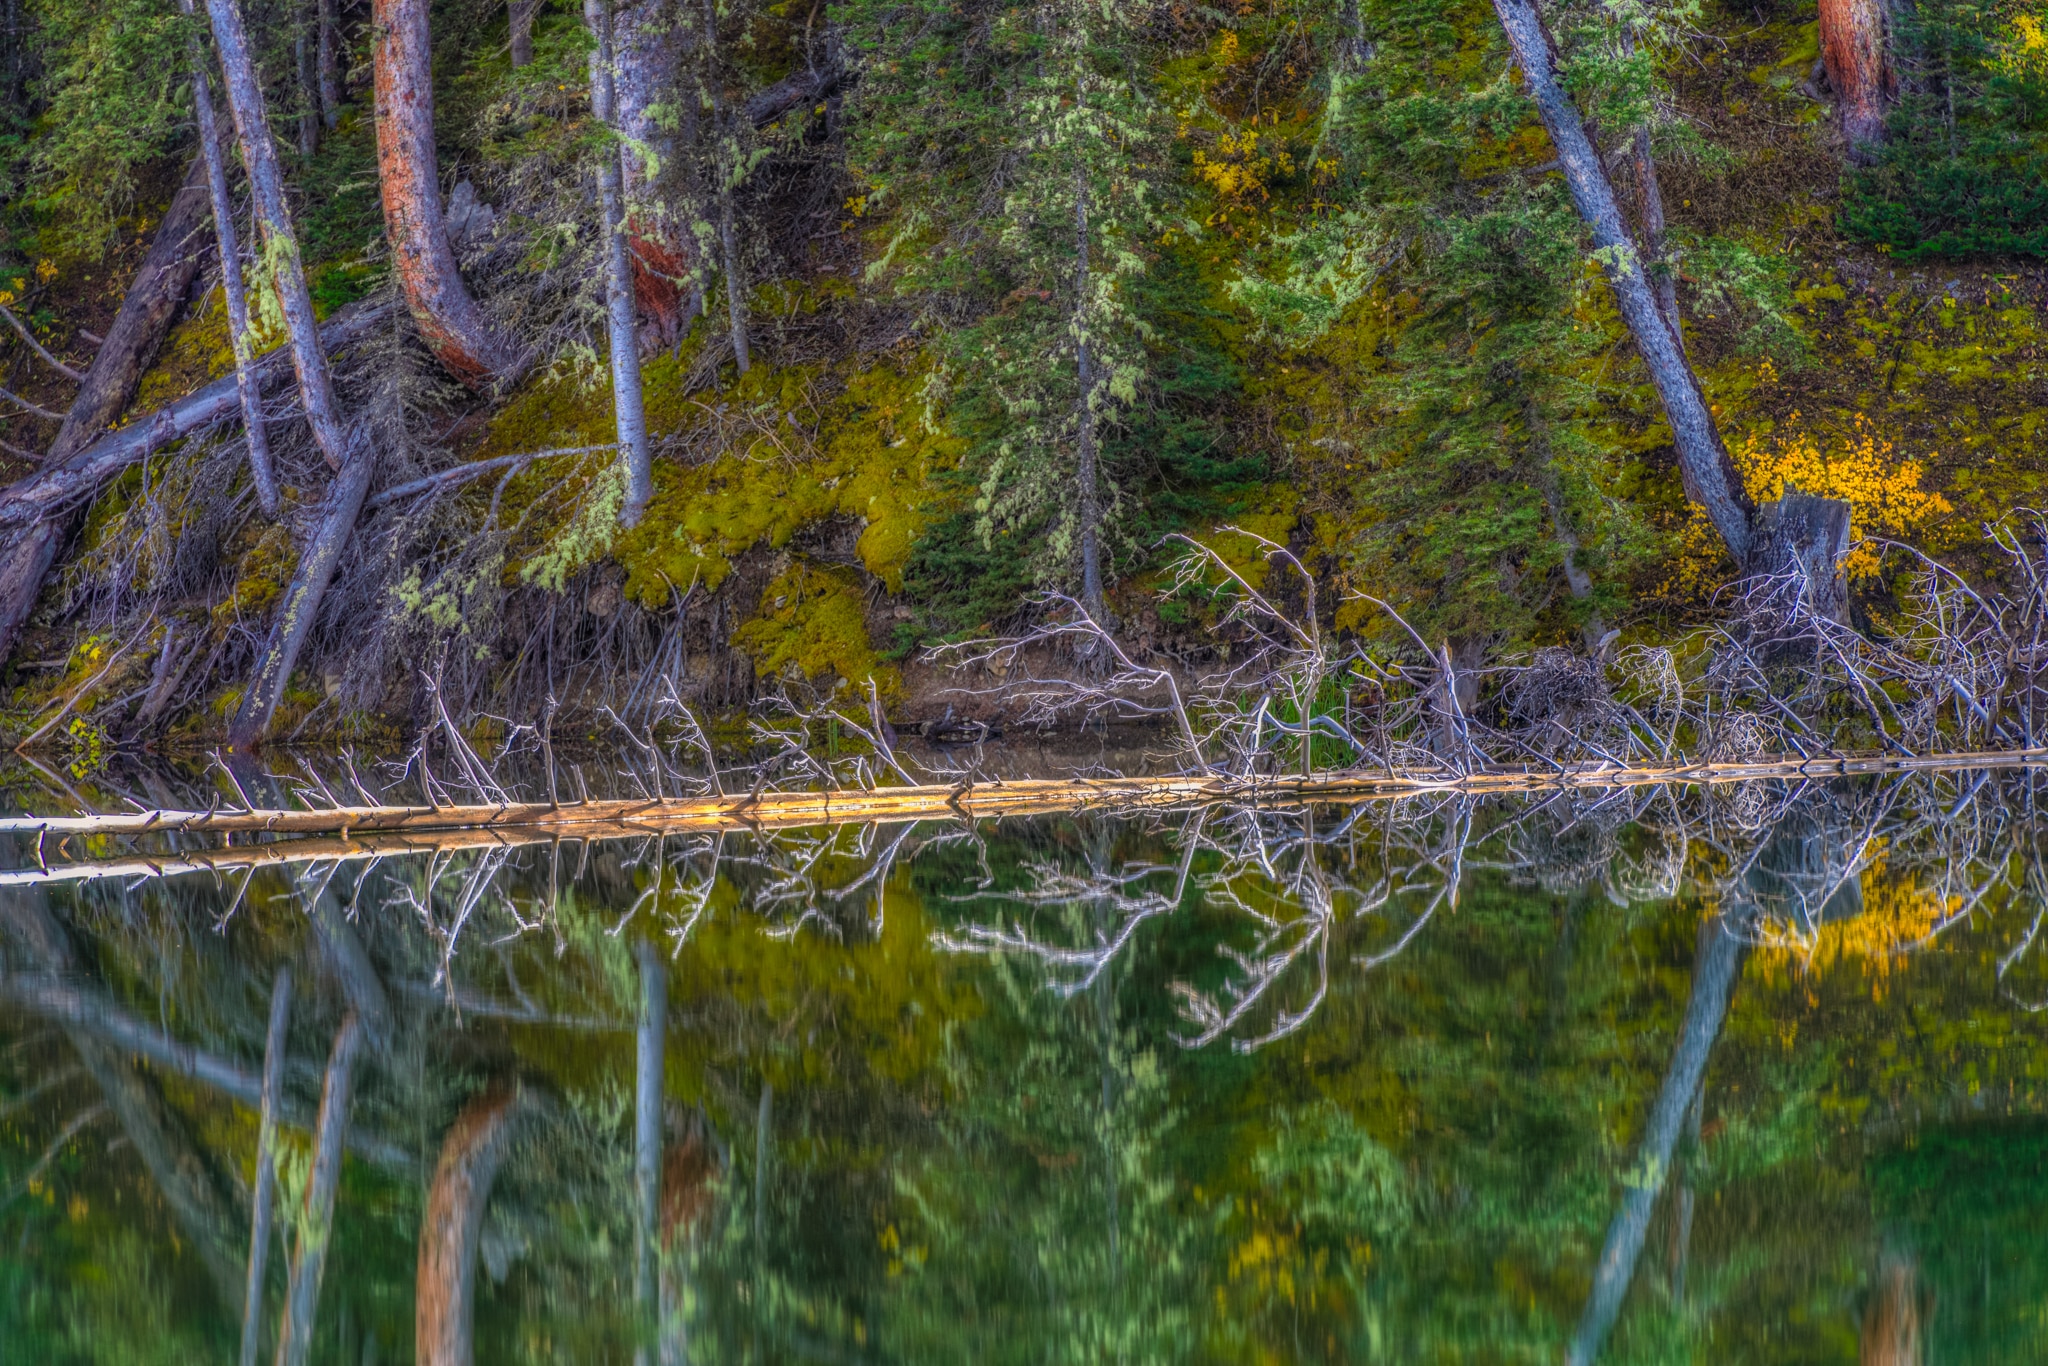 Deep woods and a fallen tree are reflected in the almost still waters of Woods Lake, at the end of Fall Creek Road, near Telluride, Colorado.